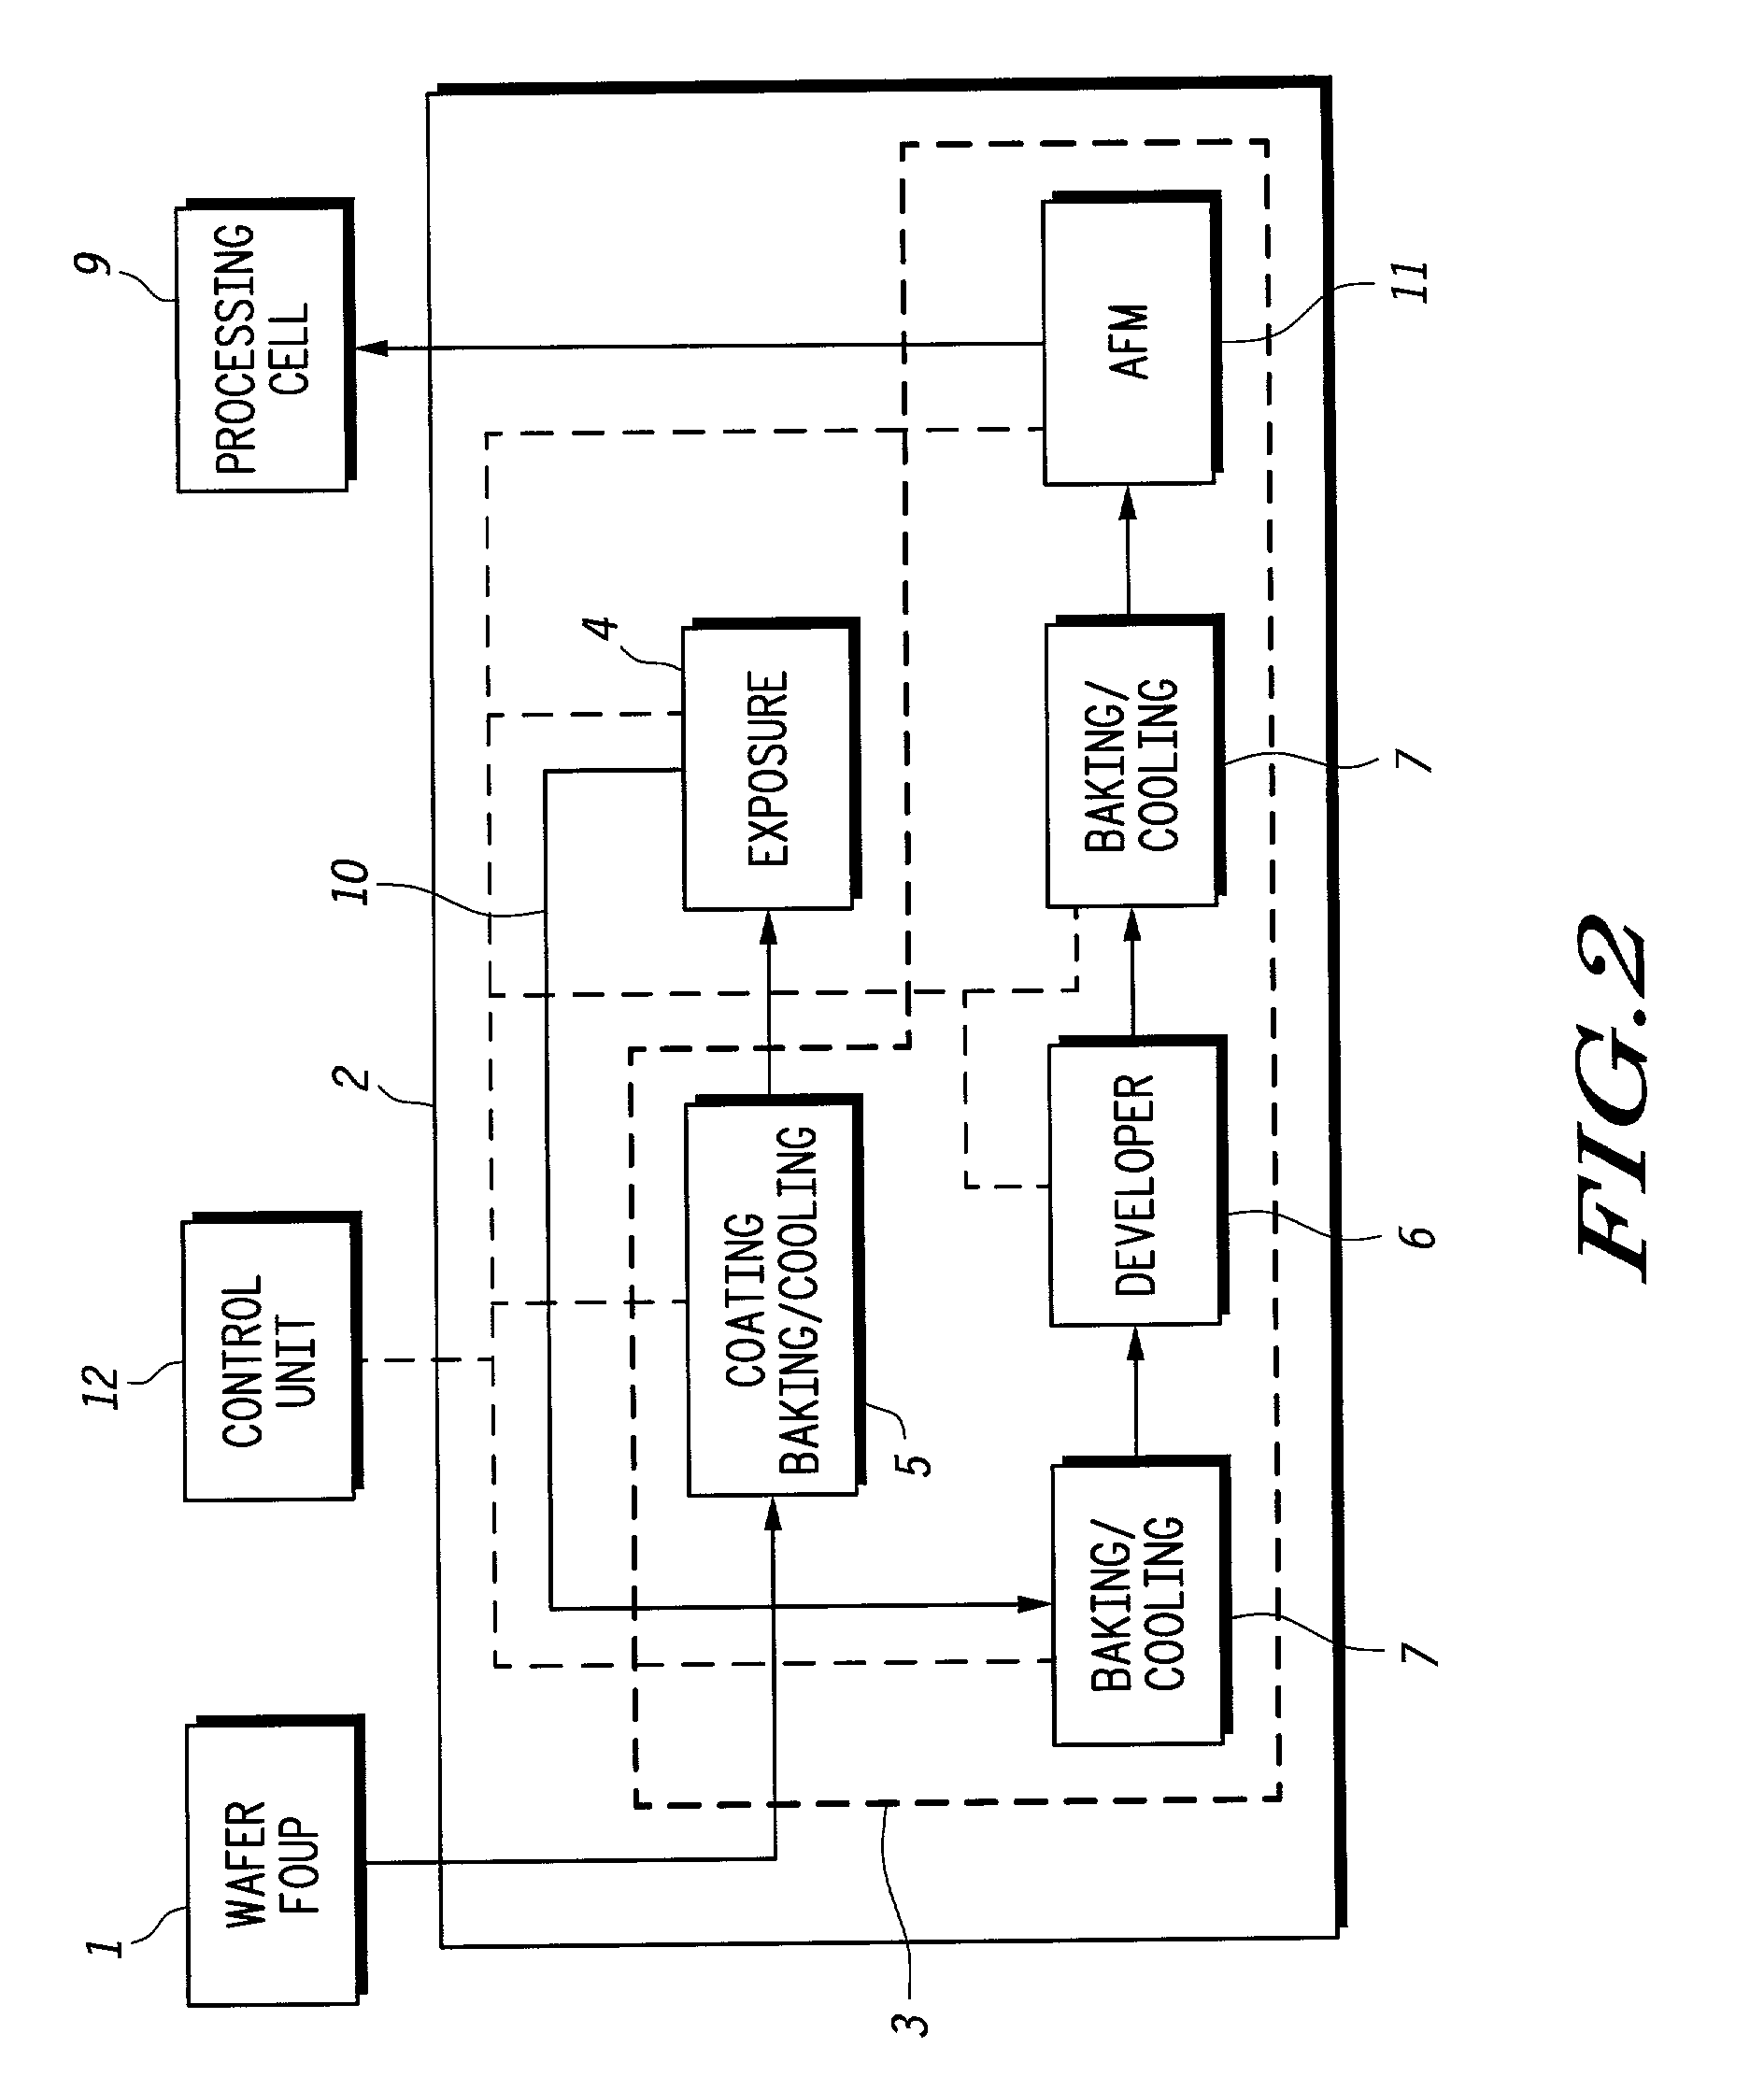 Lithography method for forming semiconductor devices on a wafer and apparatus